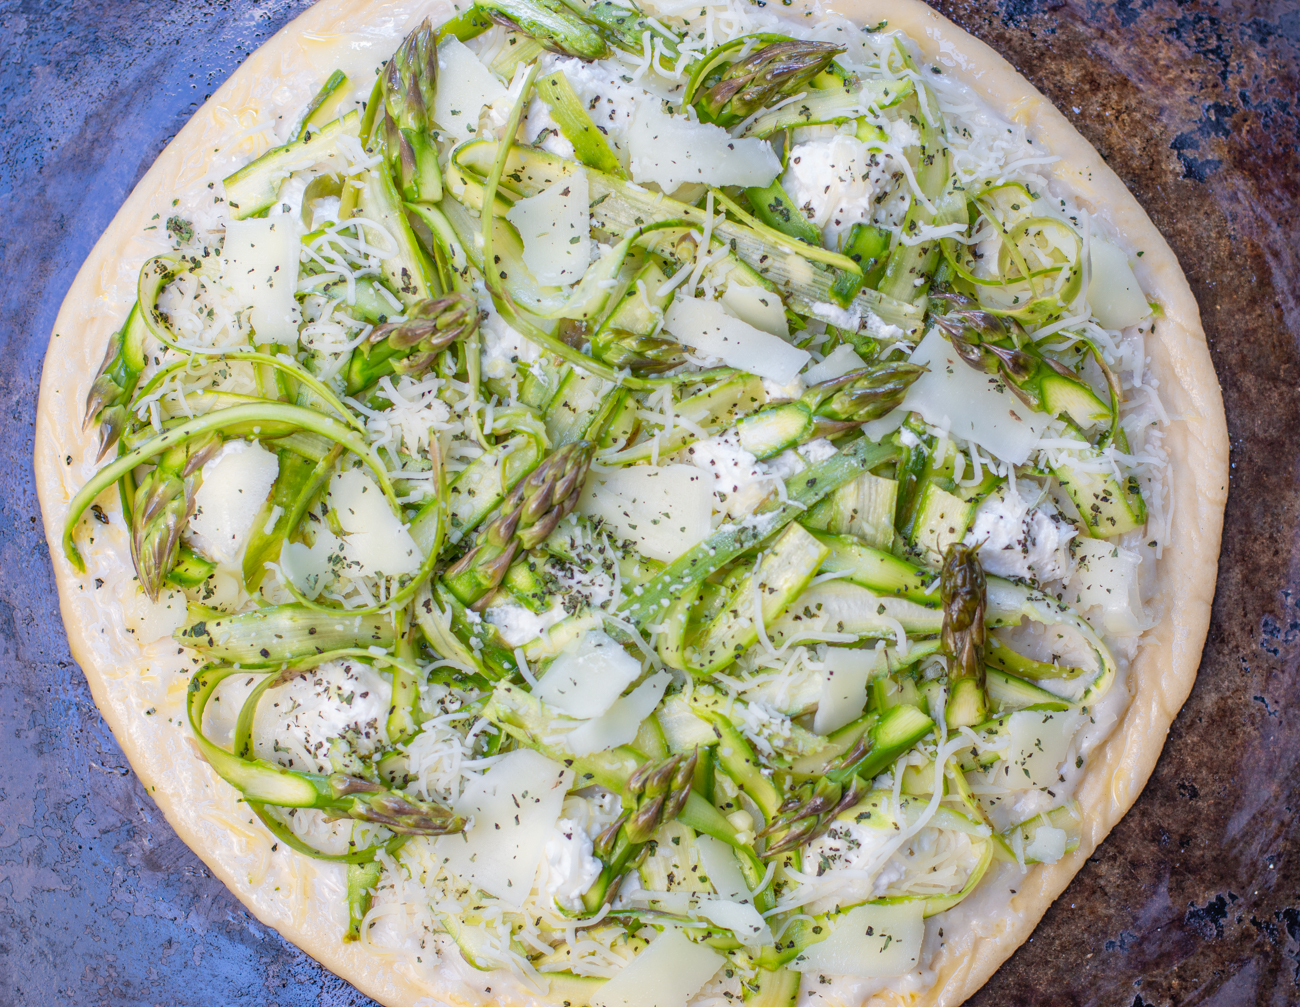 The last step for the Pizza: add the Shaved Asparagus, Asparagus Tips, rest of the cheese and a sprinkle of Dried Oregano 